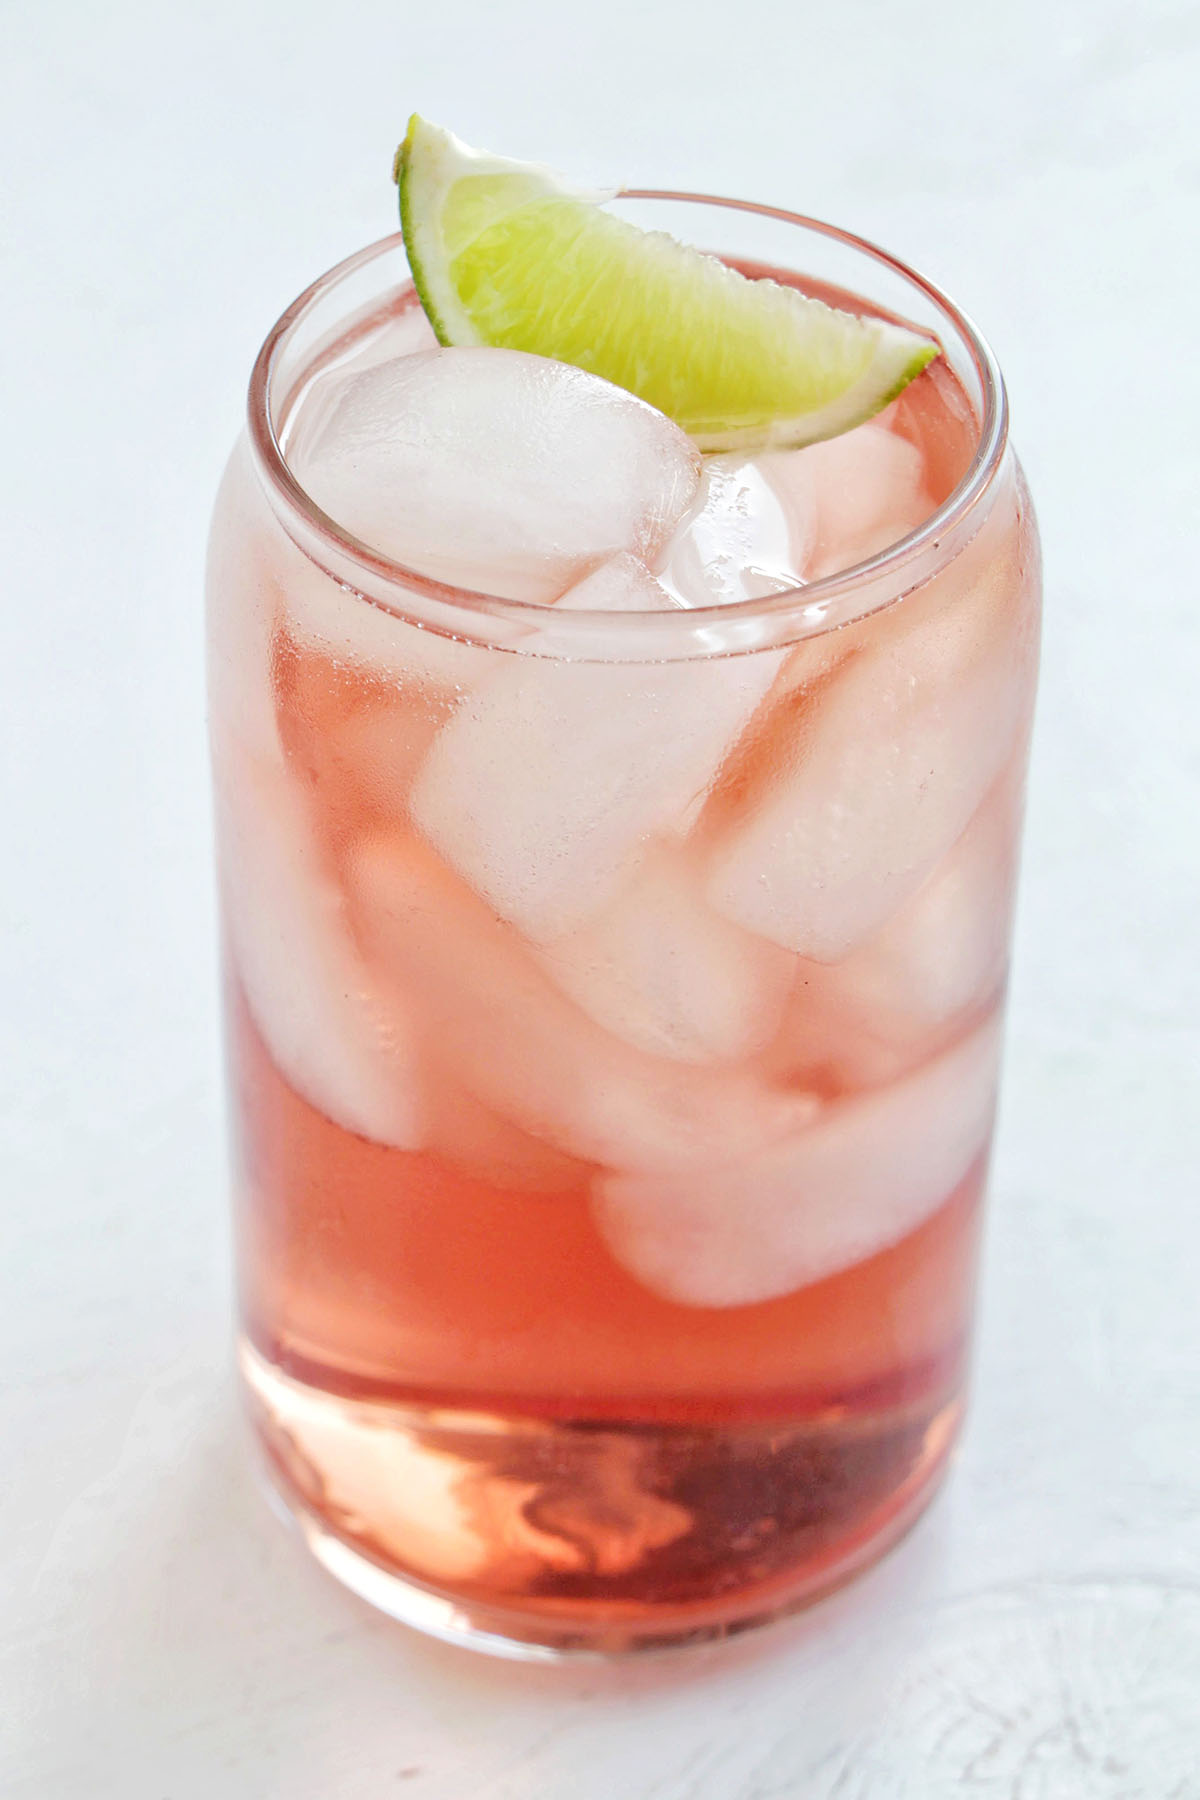 vodka cranberry with lime garnish.